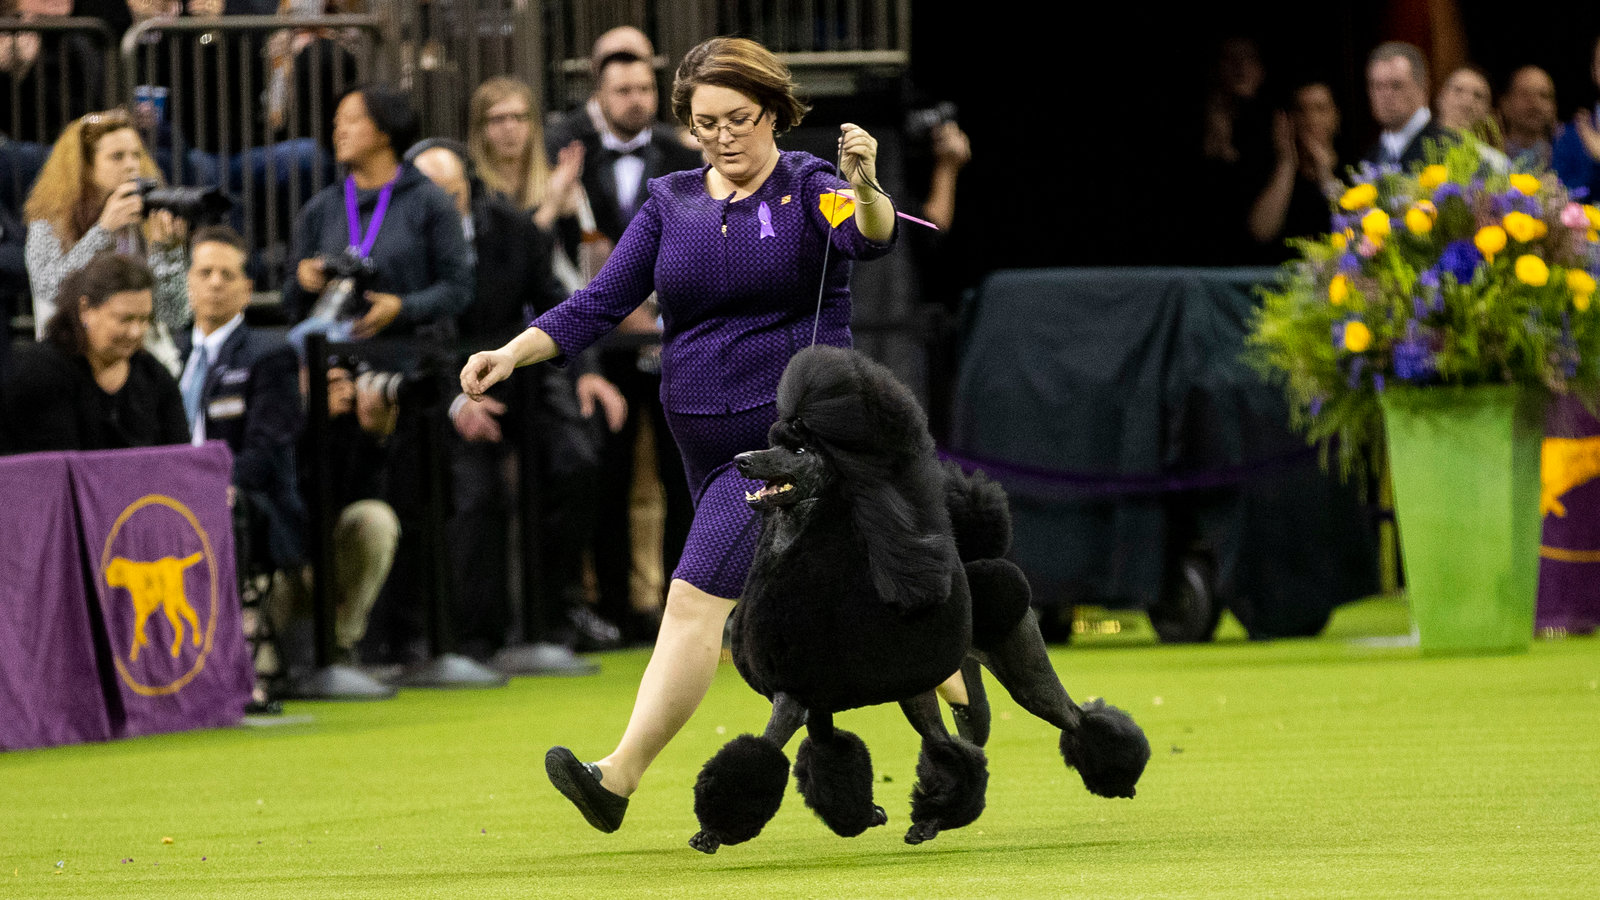 Siba The Standard Poodle Wins Westminster Dog Show New York